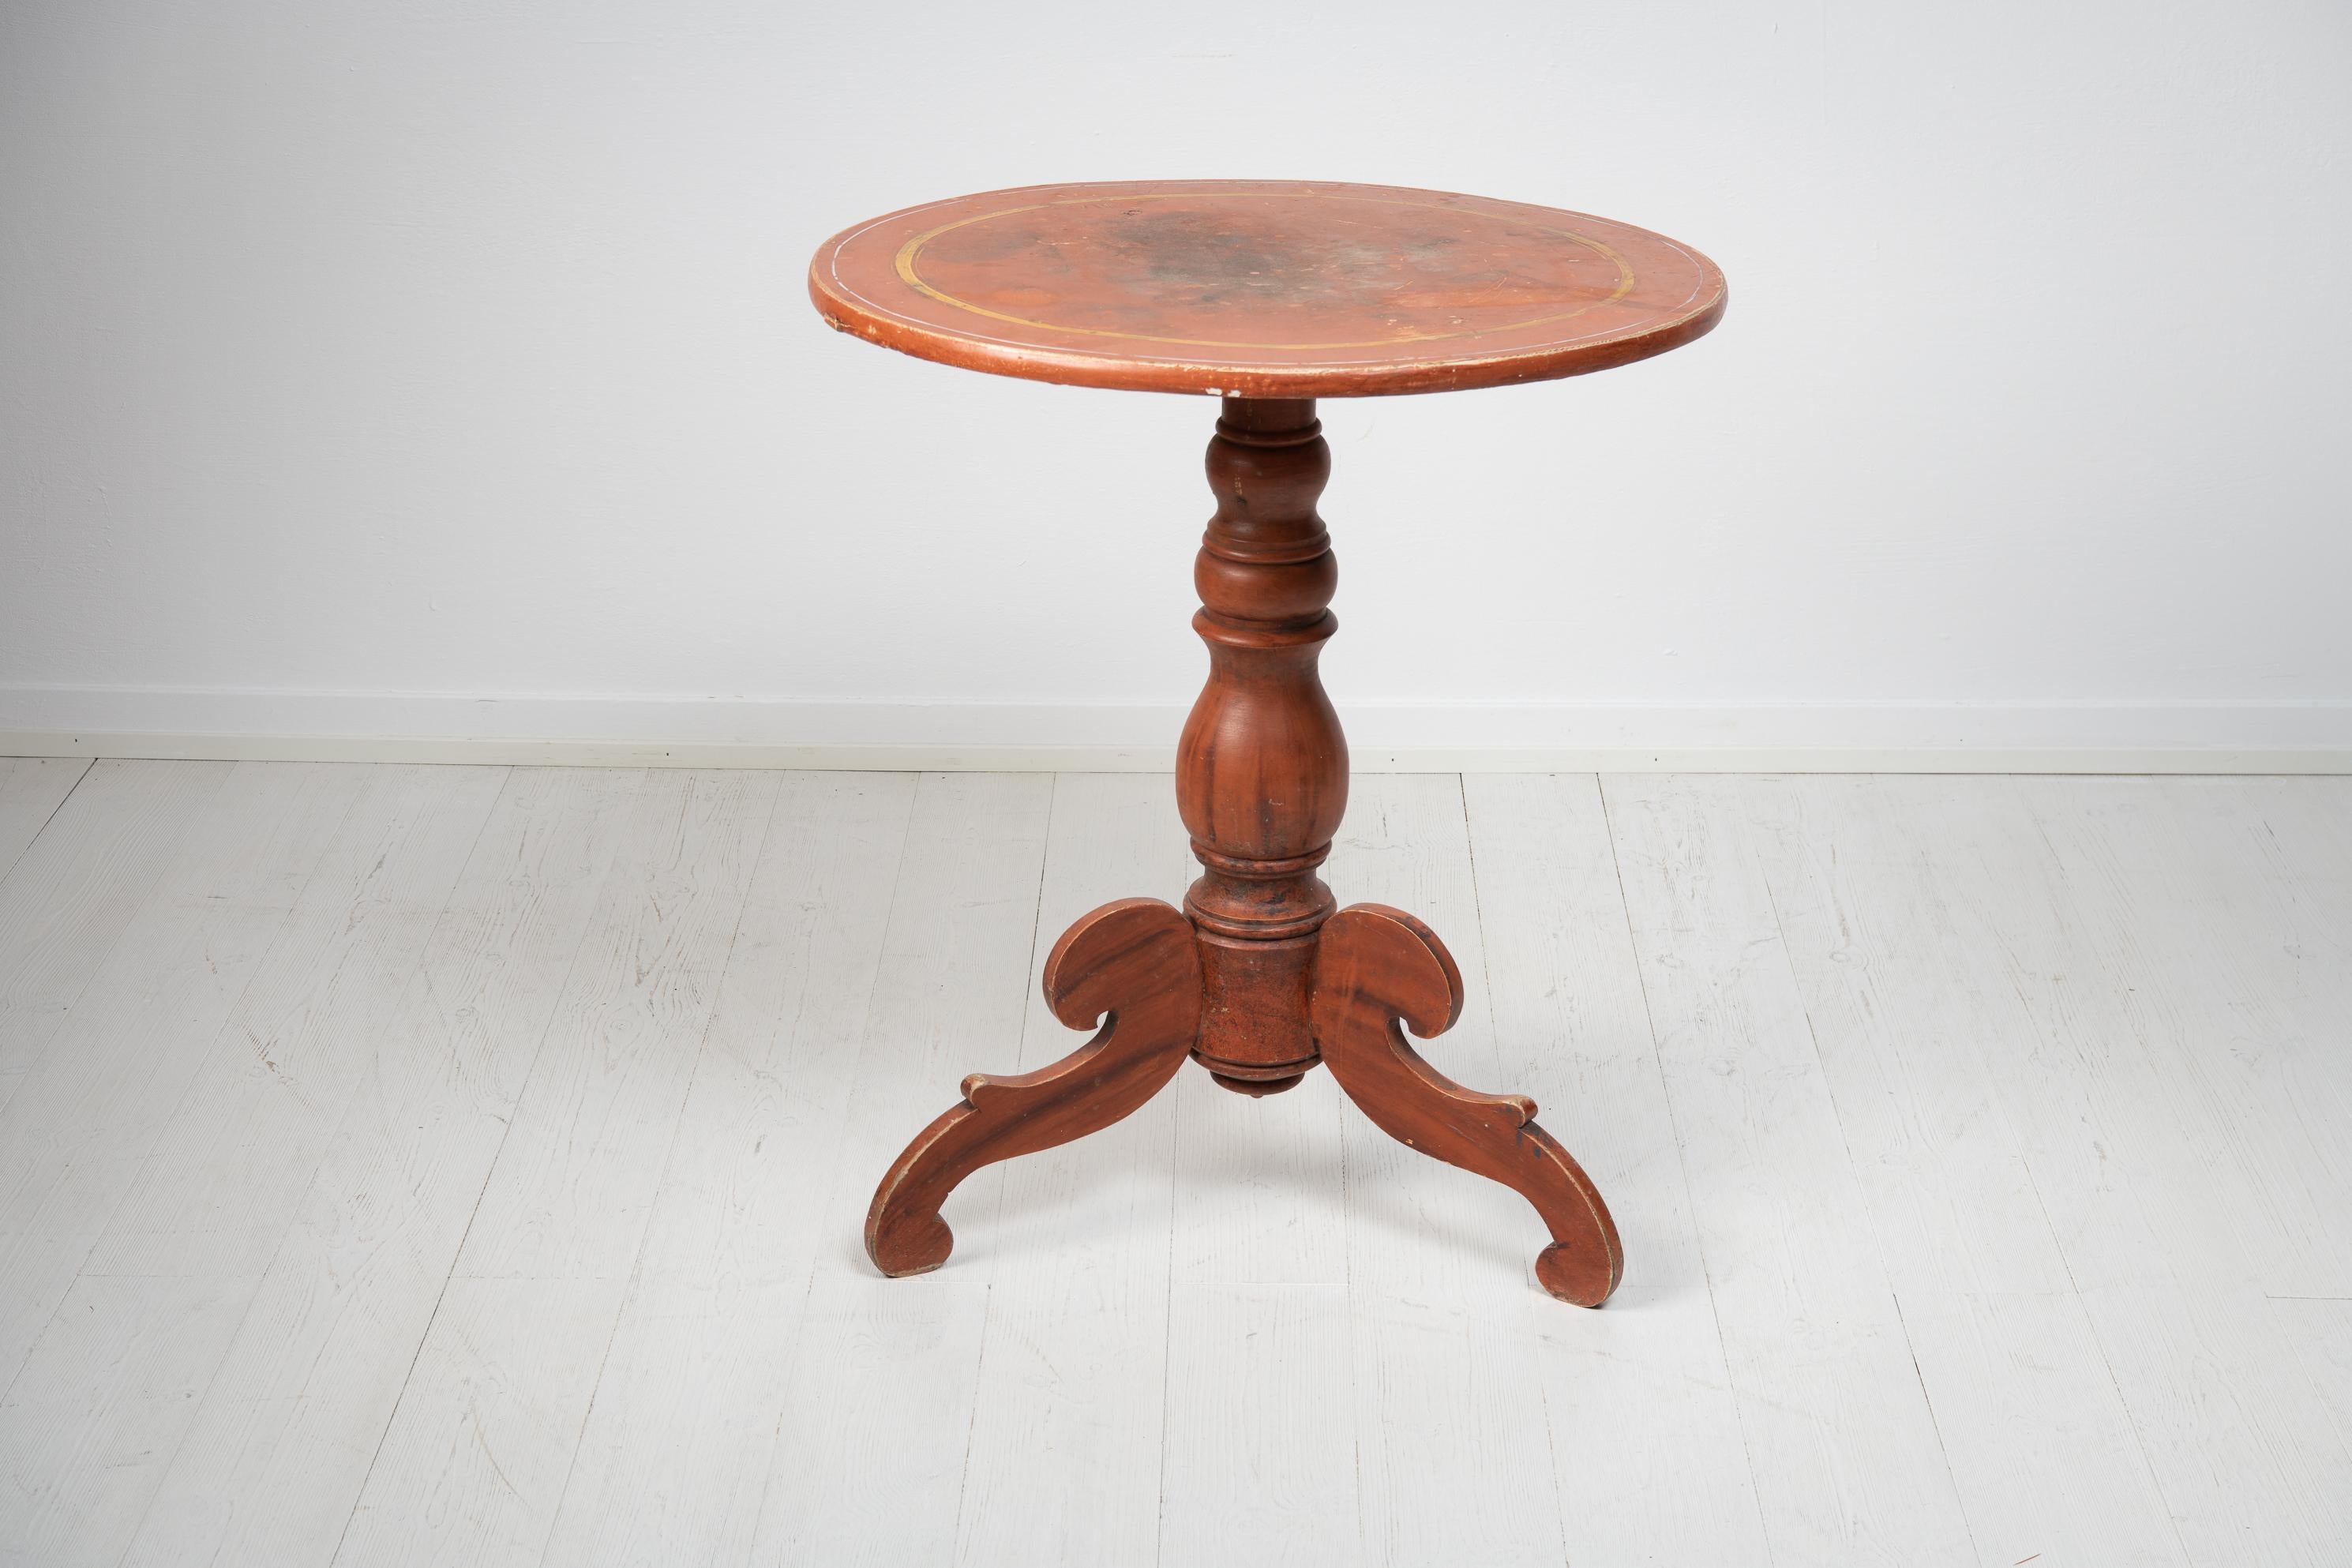 Rustic pedestal table with a round table top from Sweden. The table is from 1860 to 1870 and made in painted pine with the original paint from the 19th century. The table has a heavy and stable foot. The table is a rustic antique with a slightly